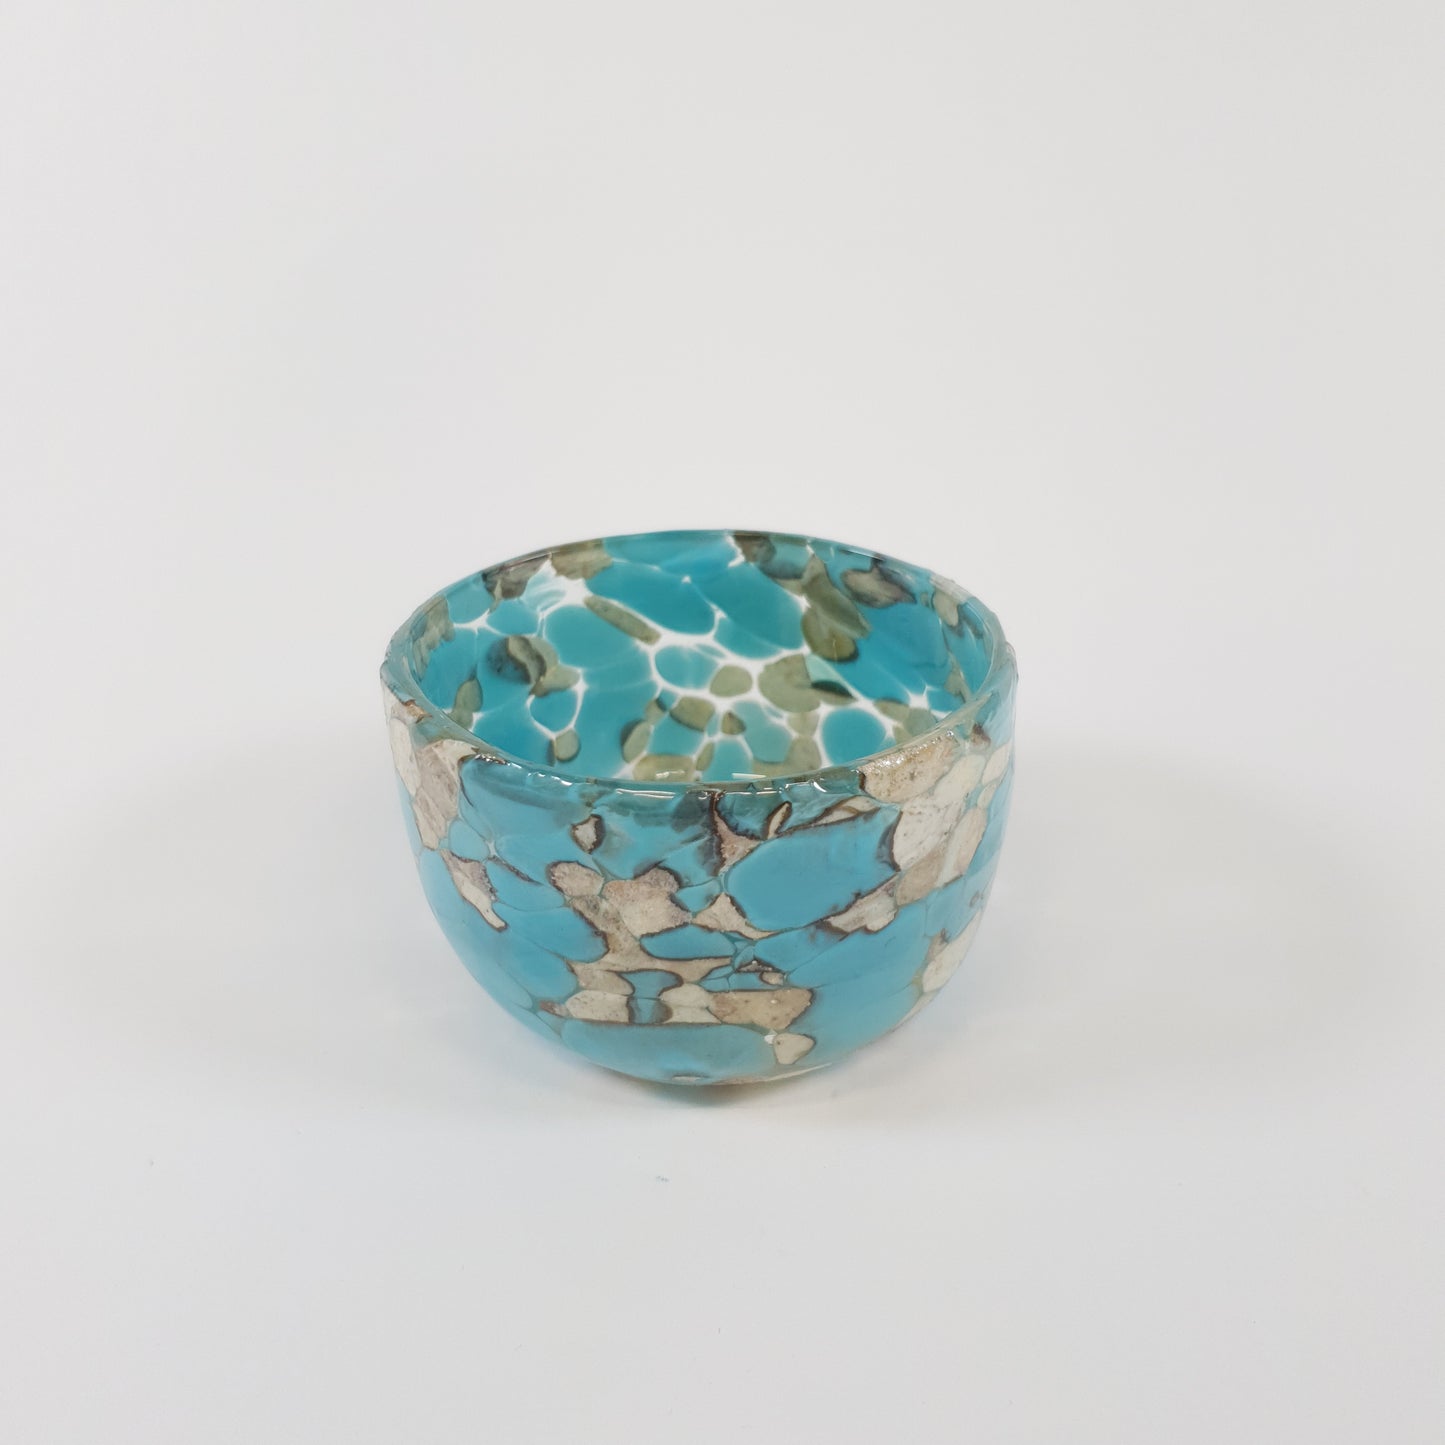 Sirena Turquesa Edition - Turquoise & Marbled Contemporay Bowl